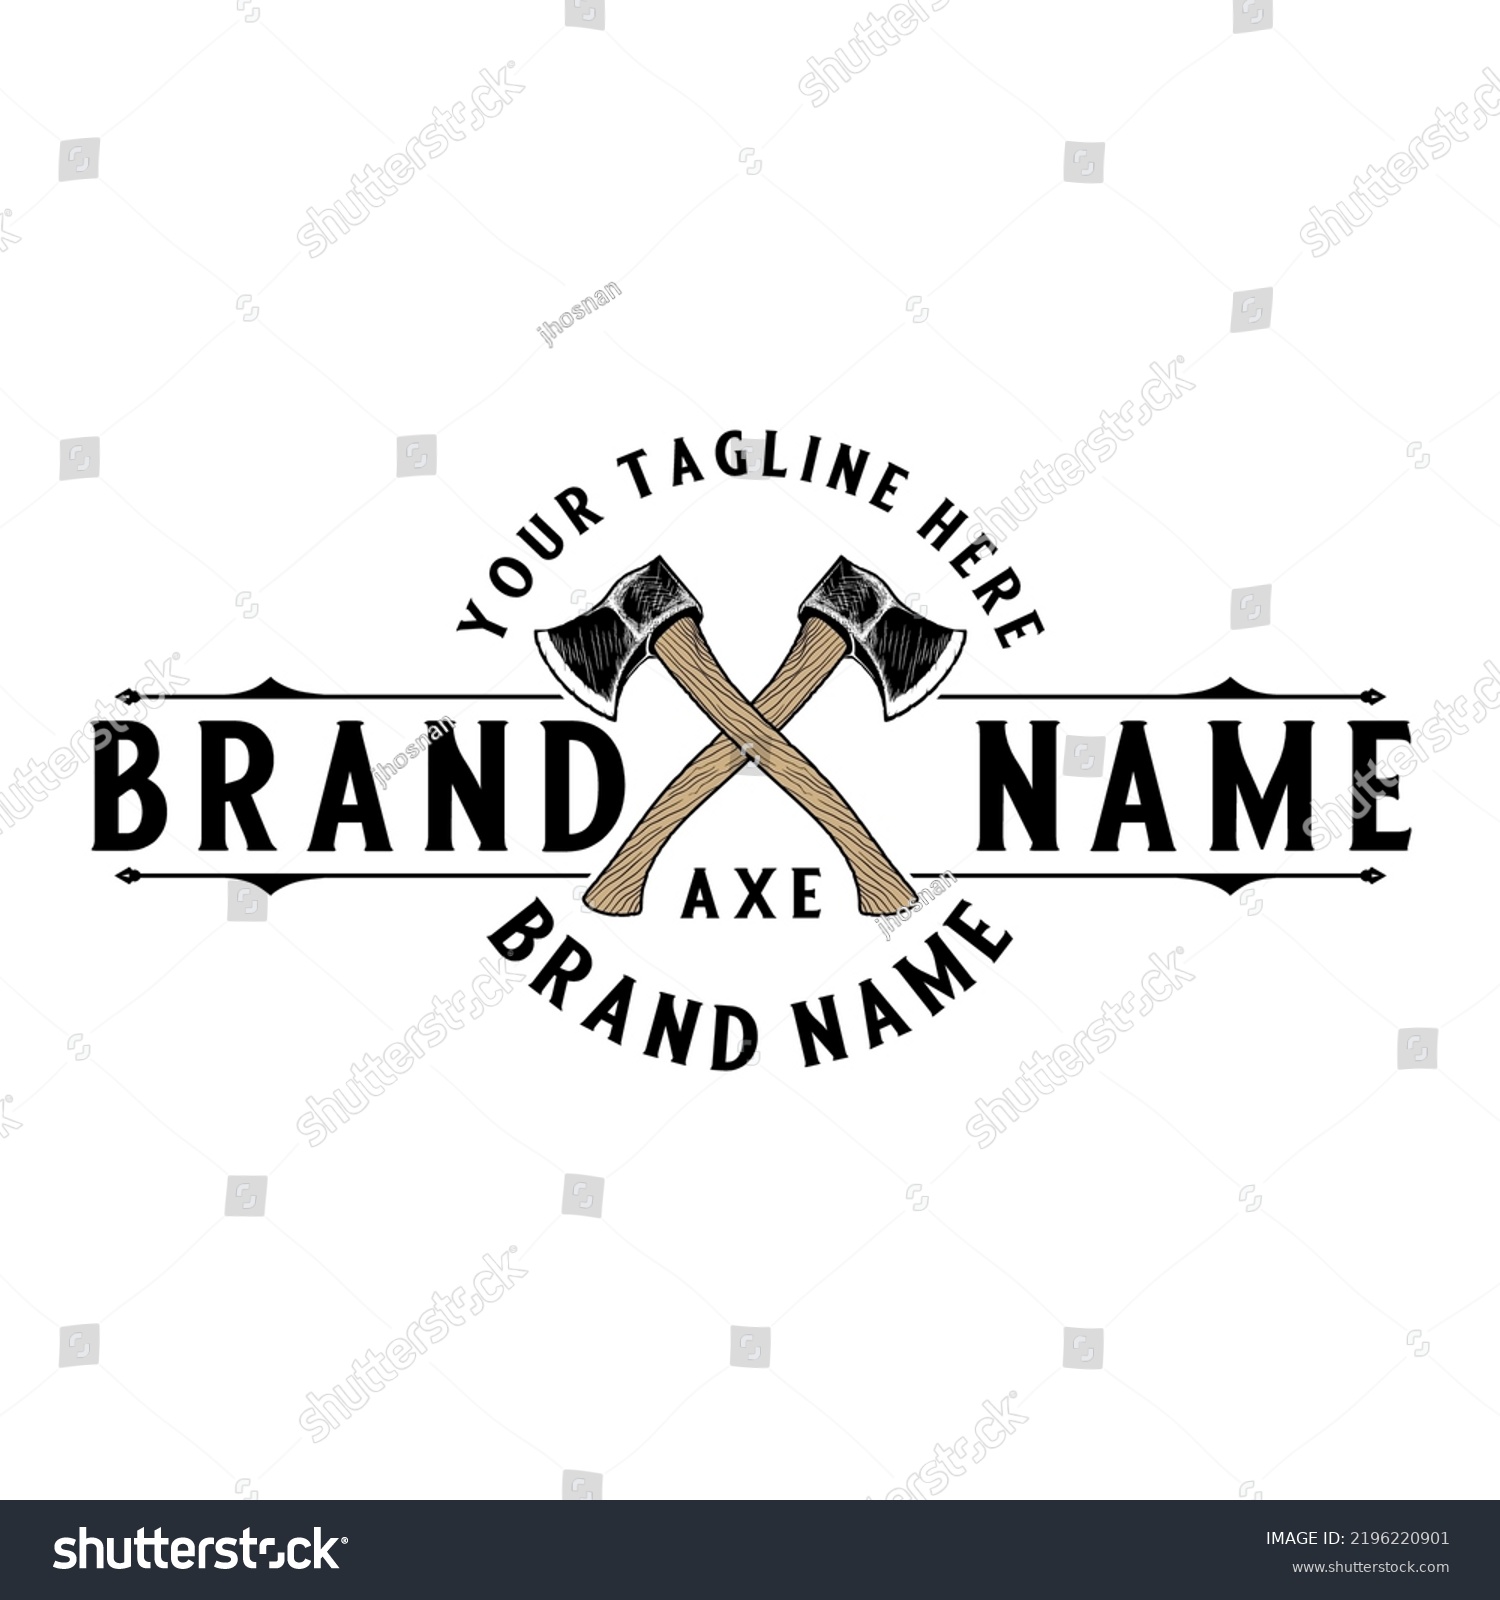 SVG of vector logo of two crossed axes.creative design for throwing axes
 svg